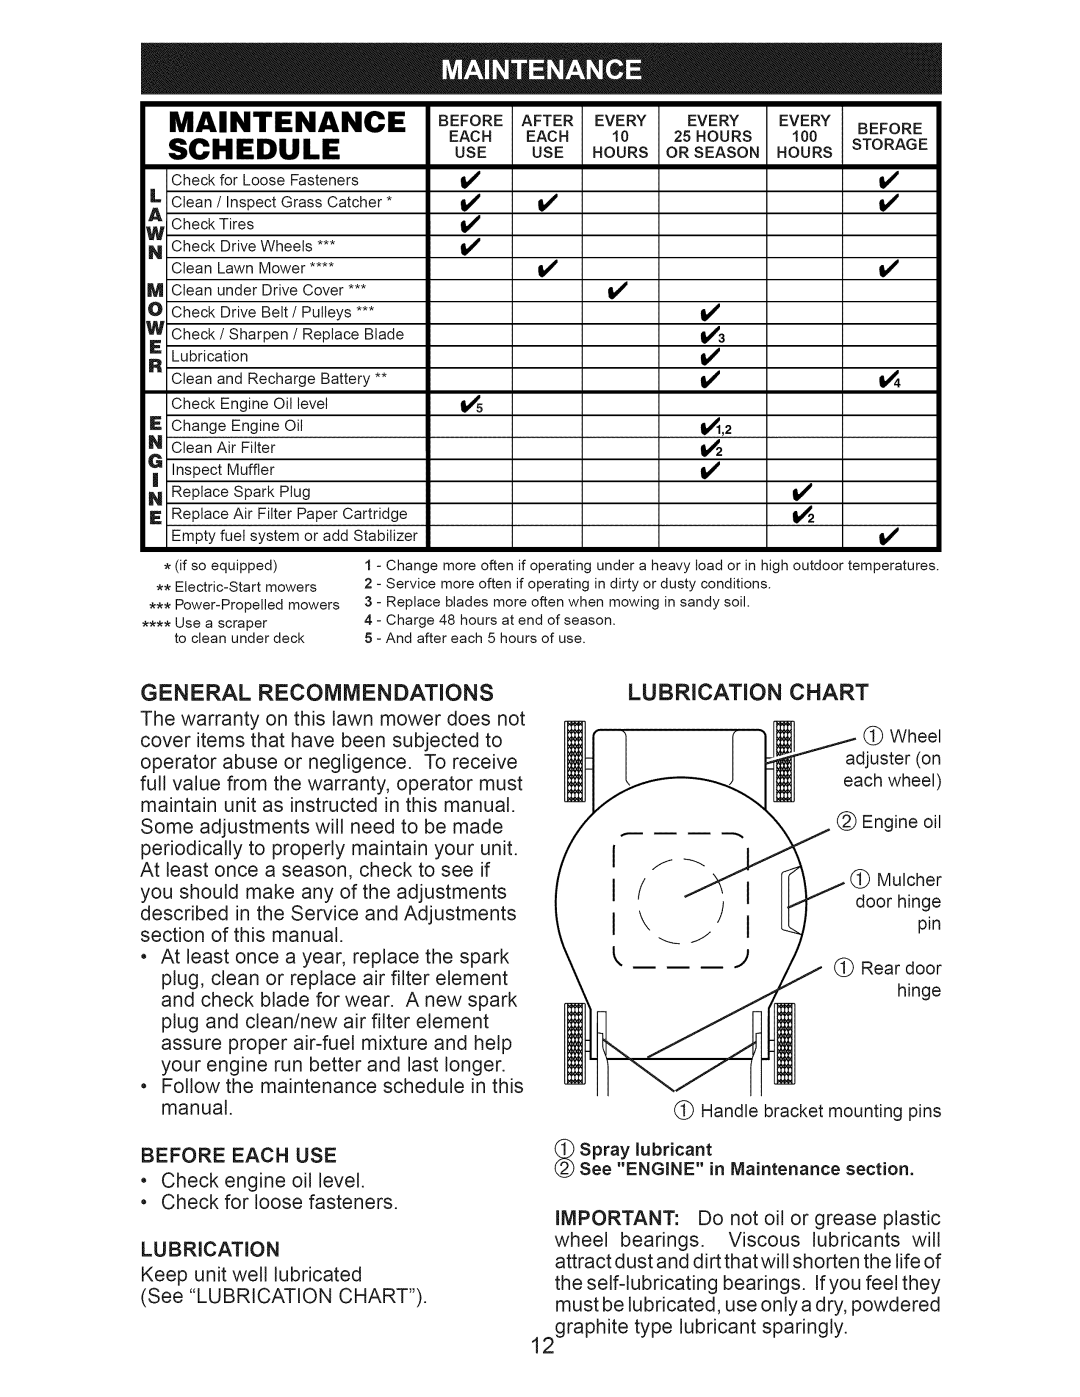 Craftsman 917.374091 owner manual Maintenance, Schedule, Use Hours 